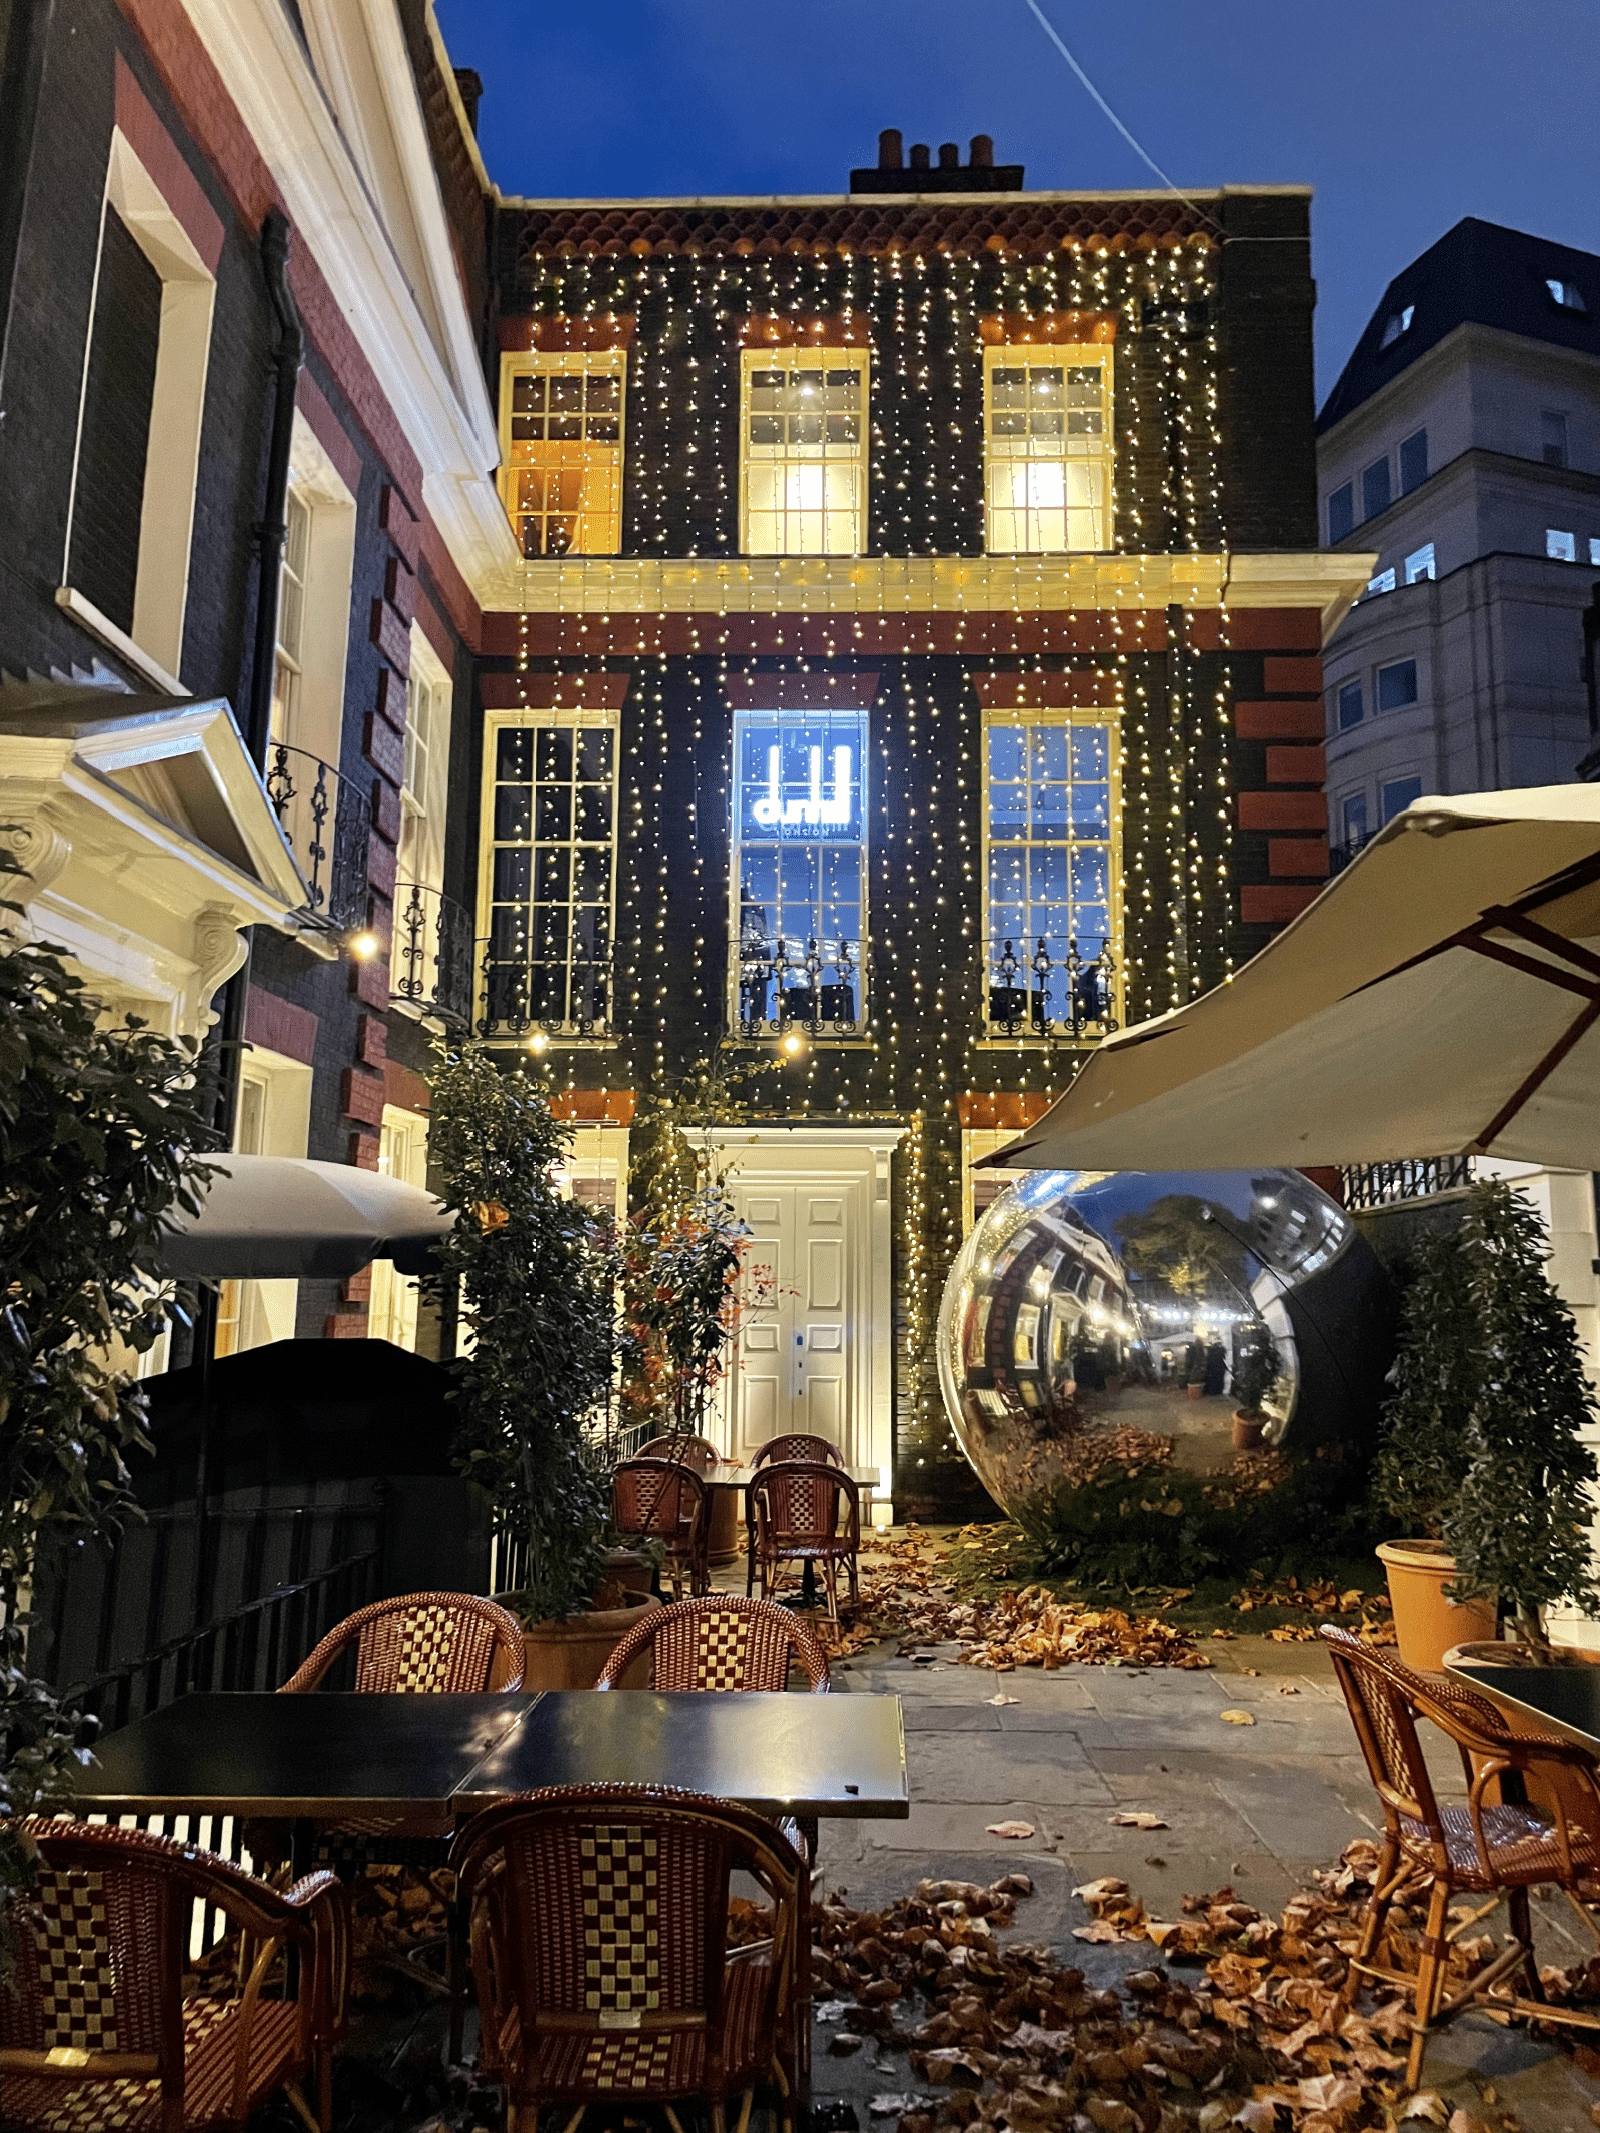 What to see in London During the Holidays